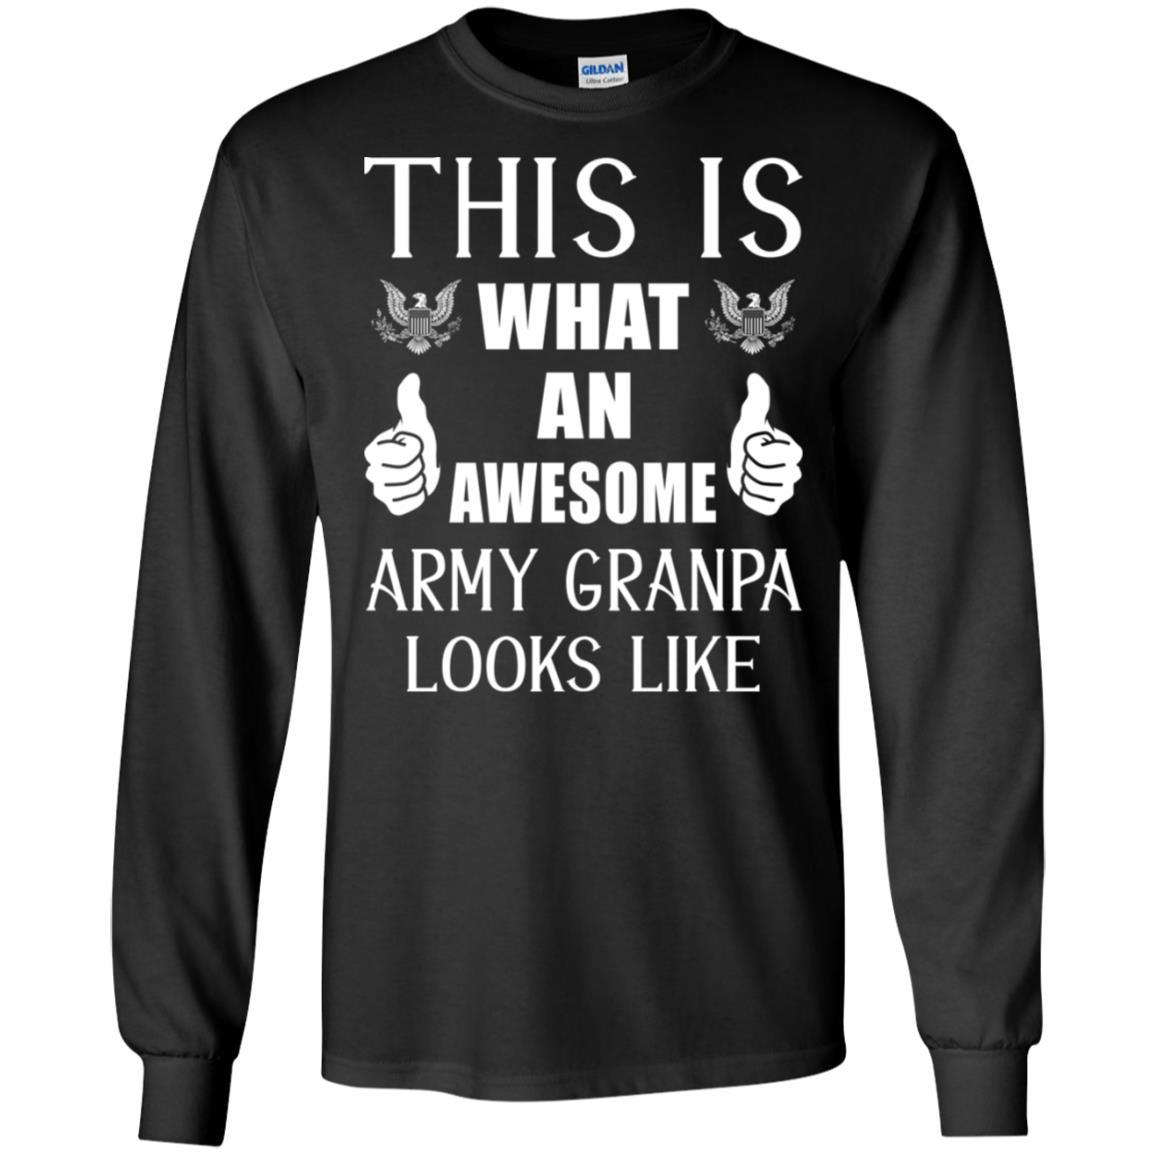 This Is What An Awesome Army Grandpa Look Like T-Shirt On Front-TShirt-Army-Veterans Nation